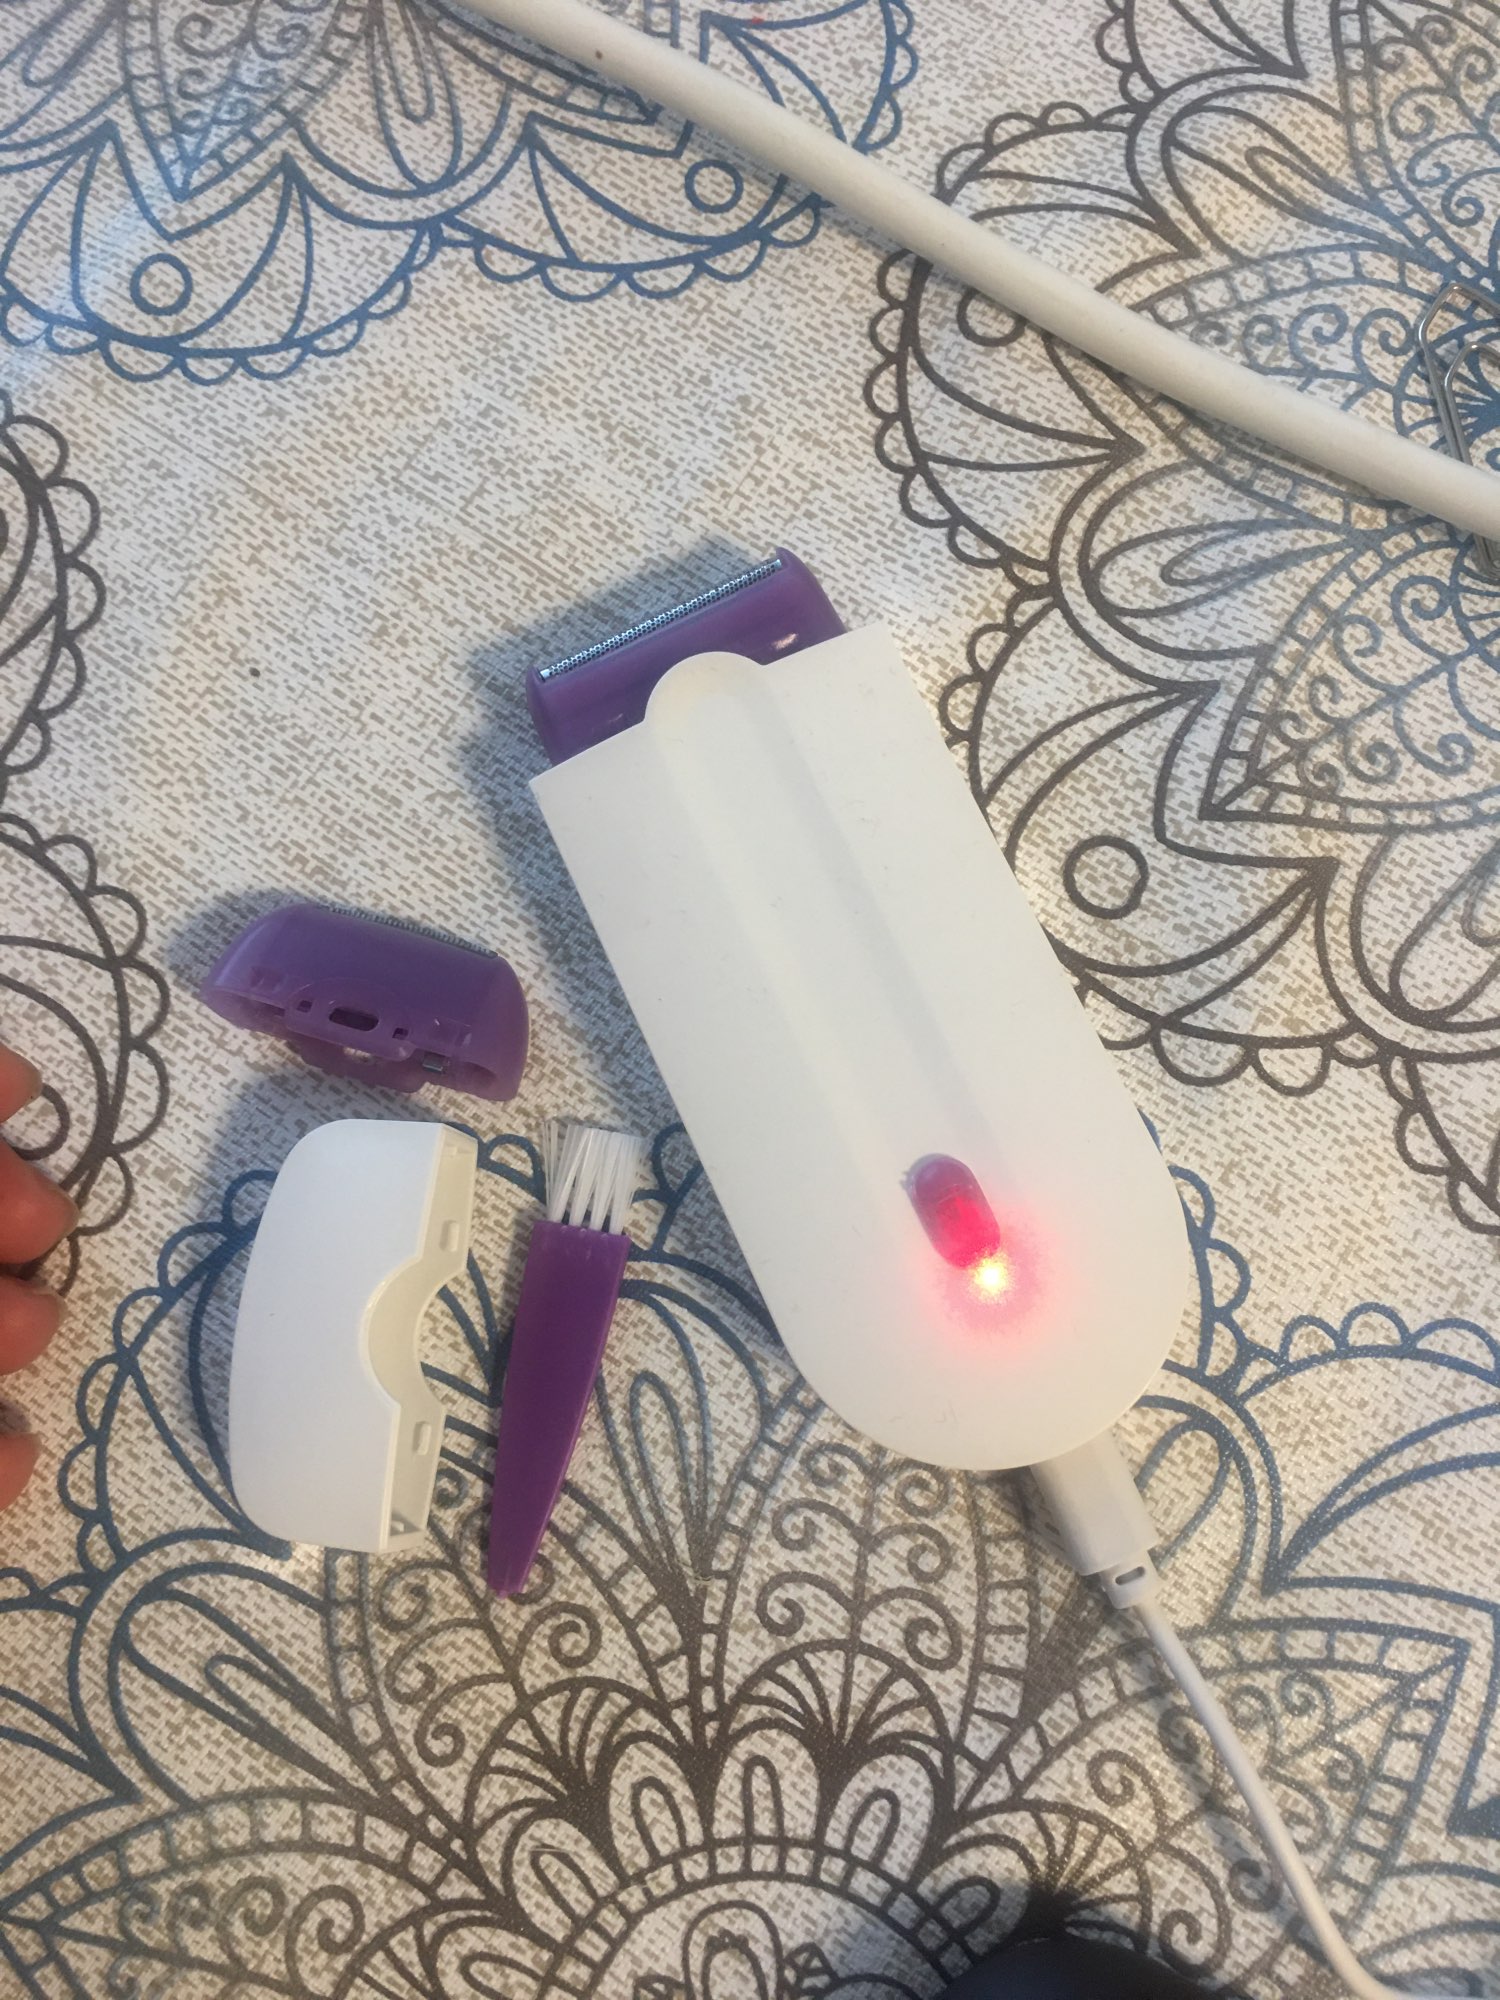 Finishing Touch Hair Remover Painless Epilator With Micro Vibrations photo review